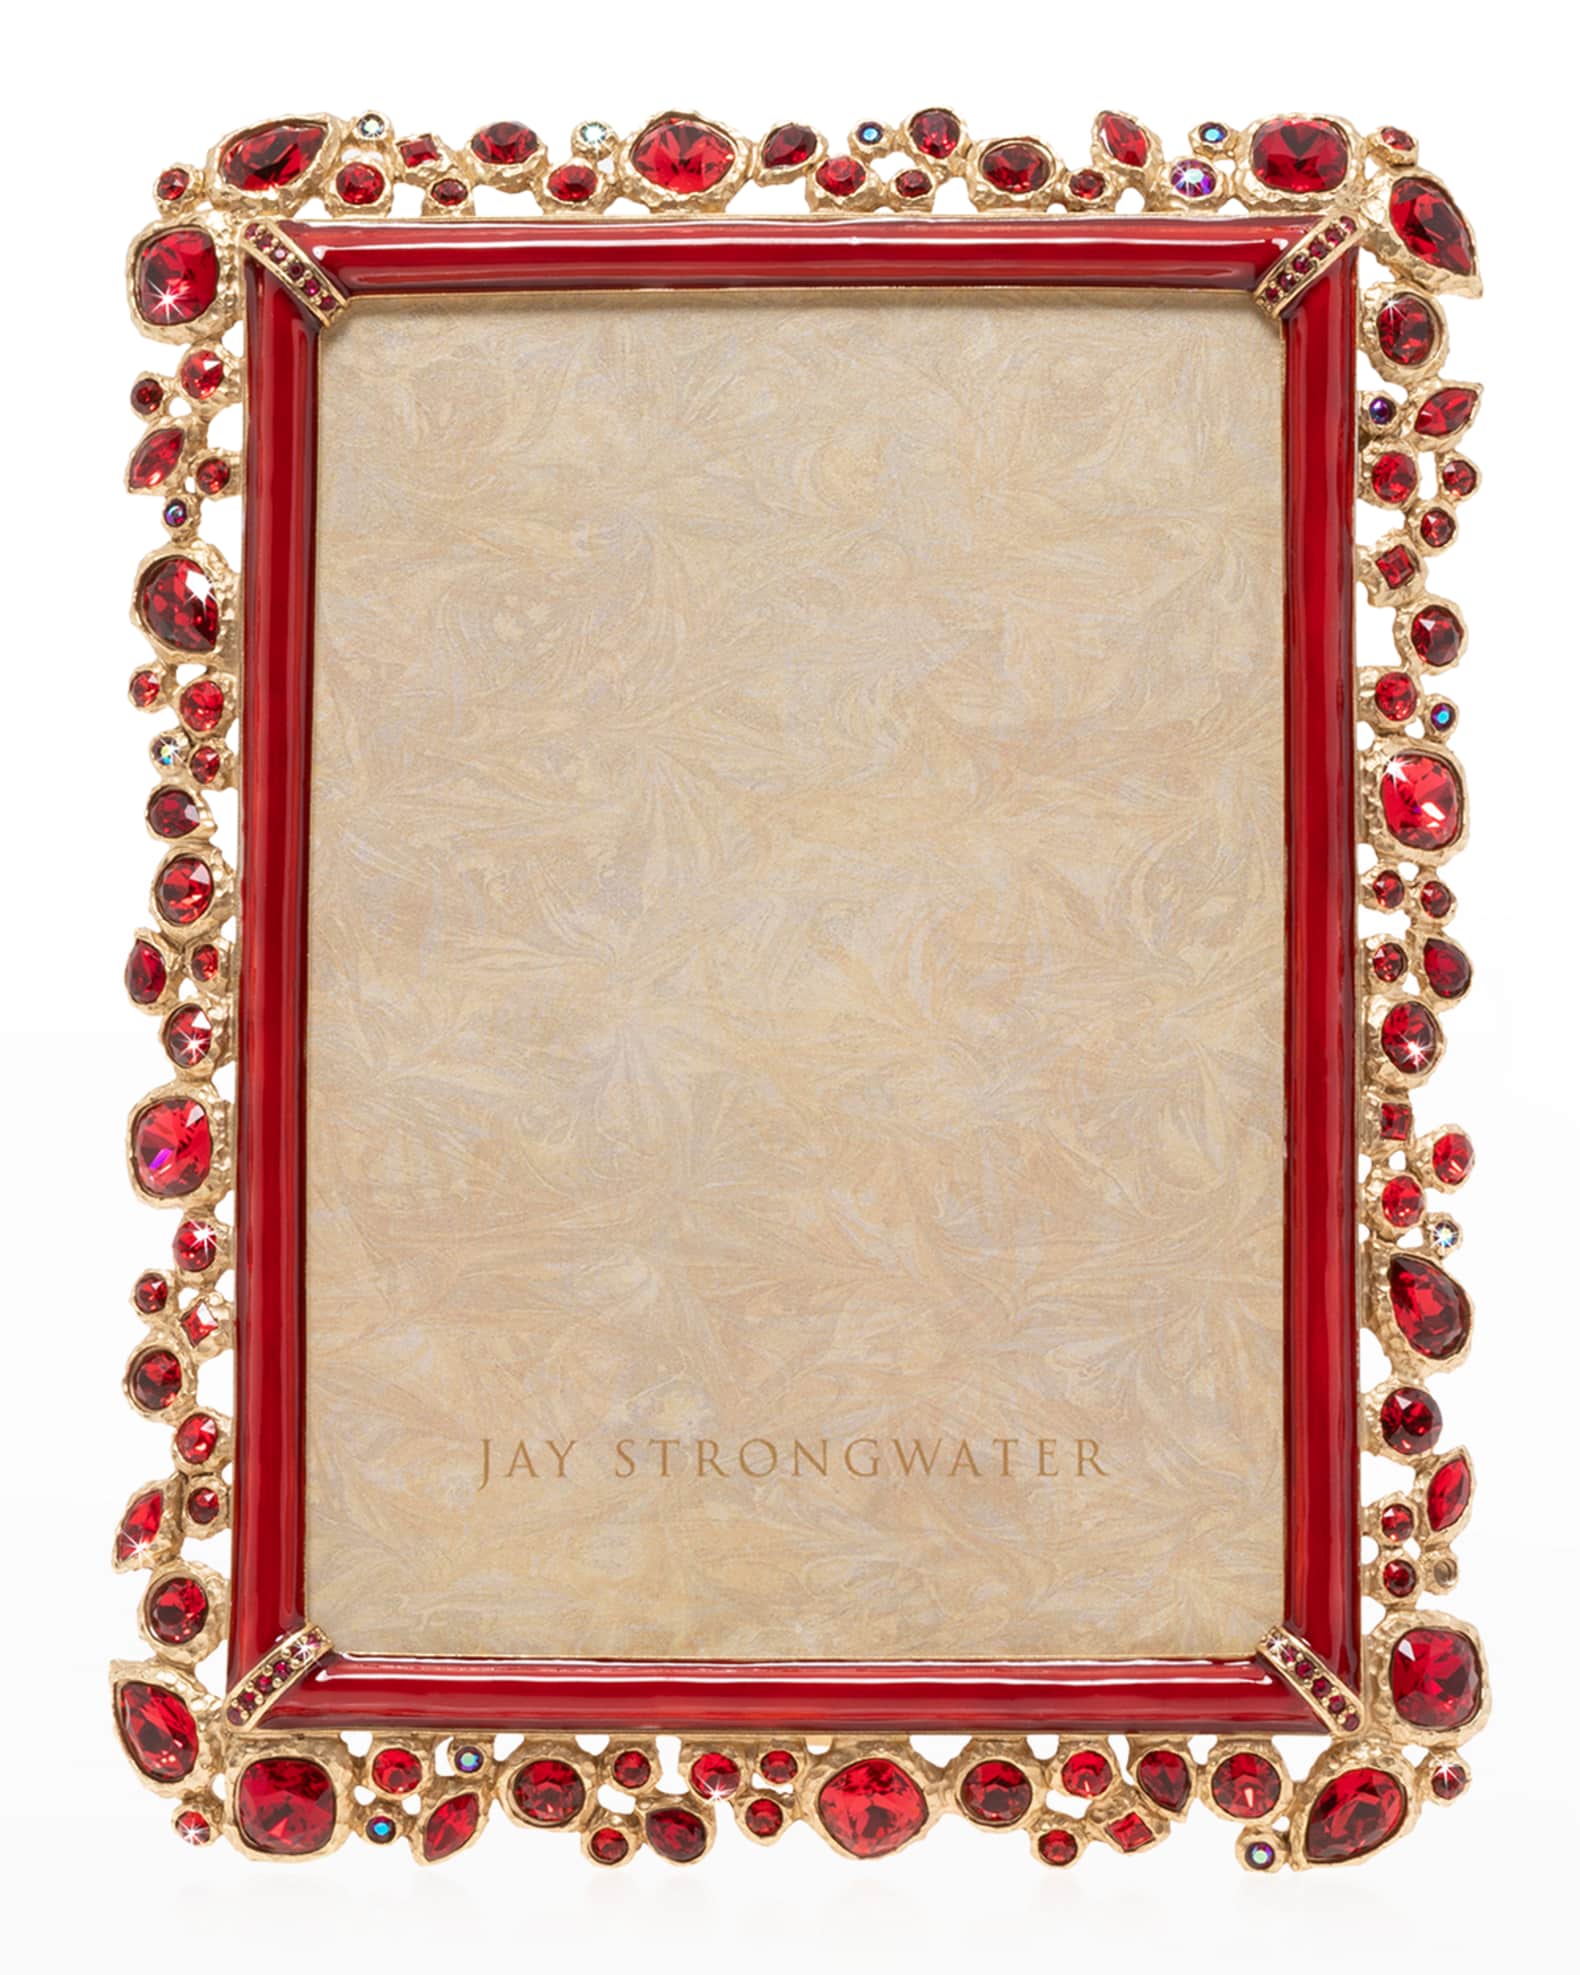 Jay Strongwater Bejeweled Frame, 5" x 7"